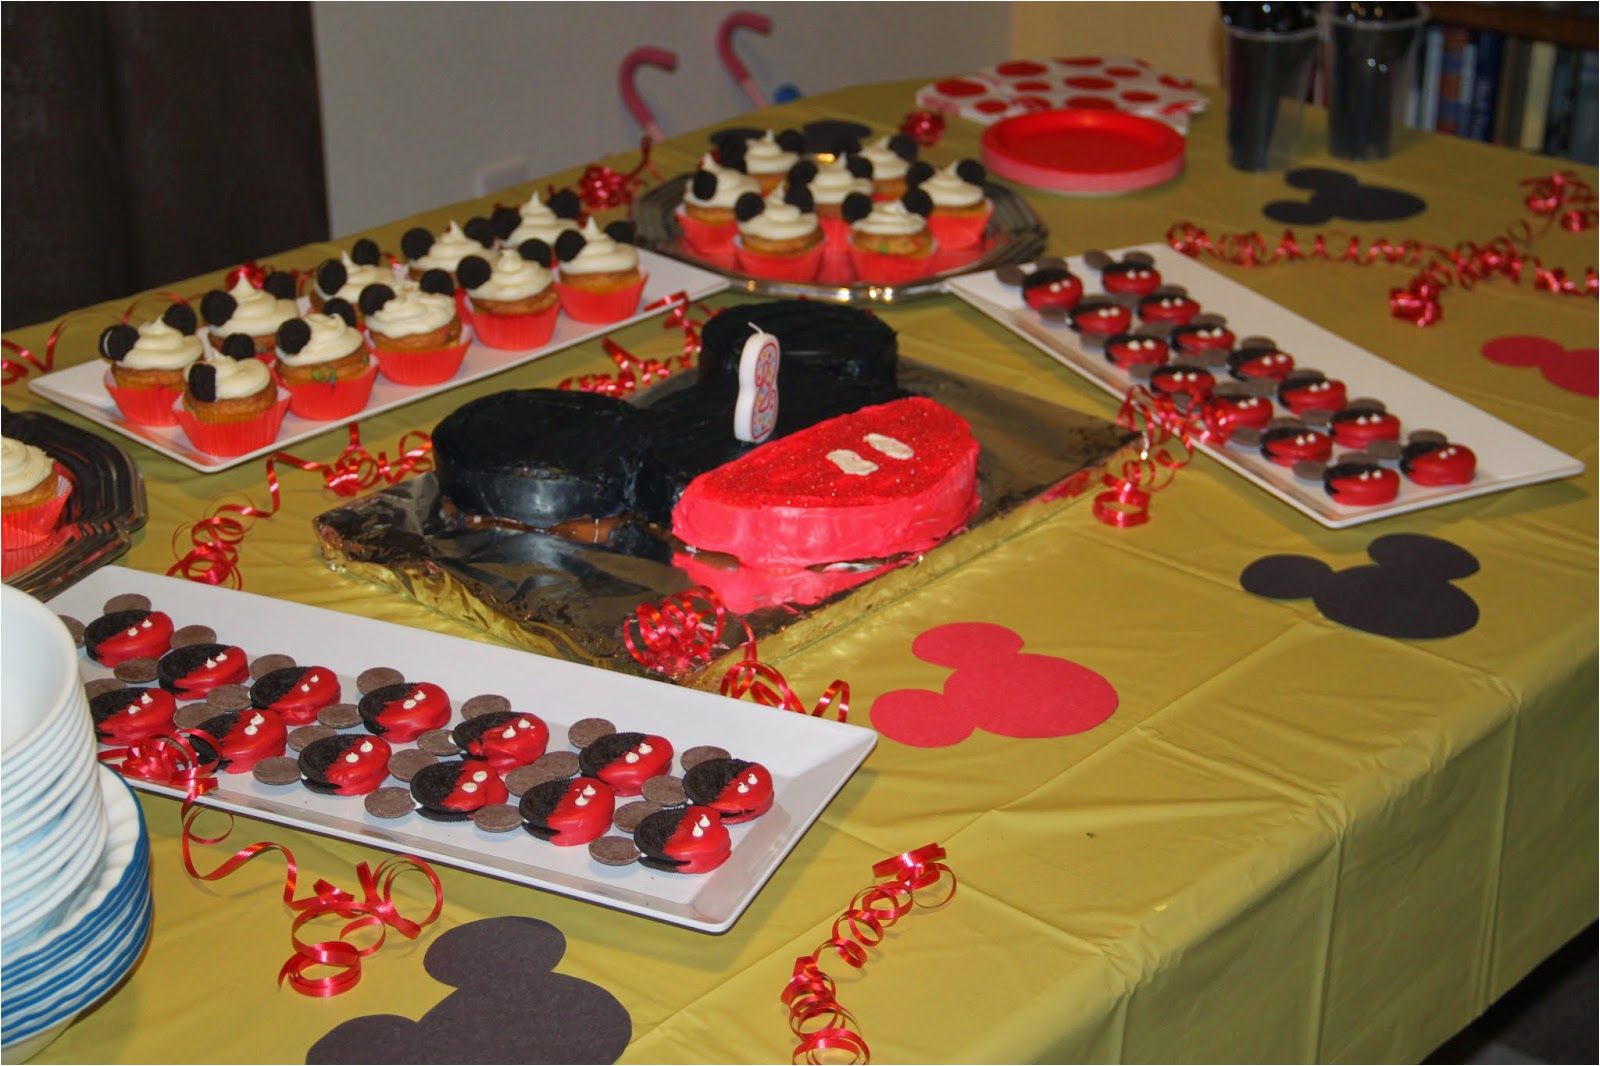 mickey mouse birthday party